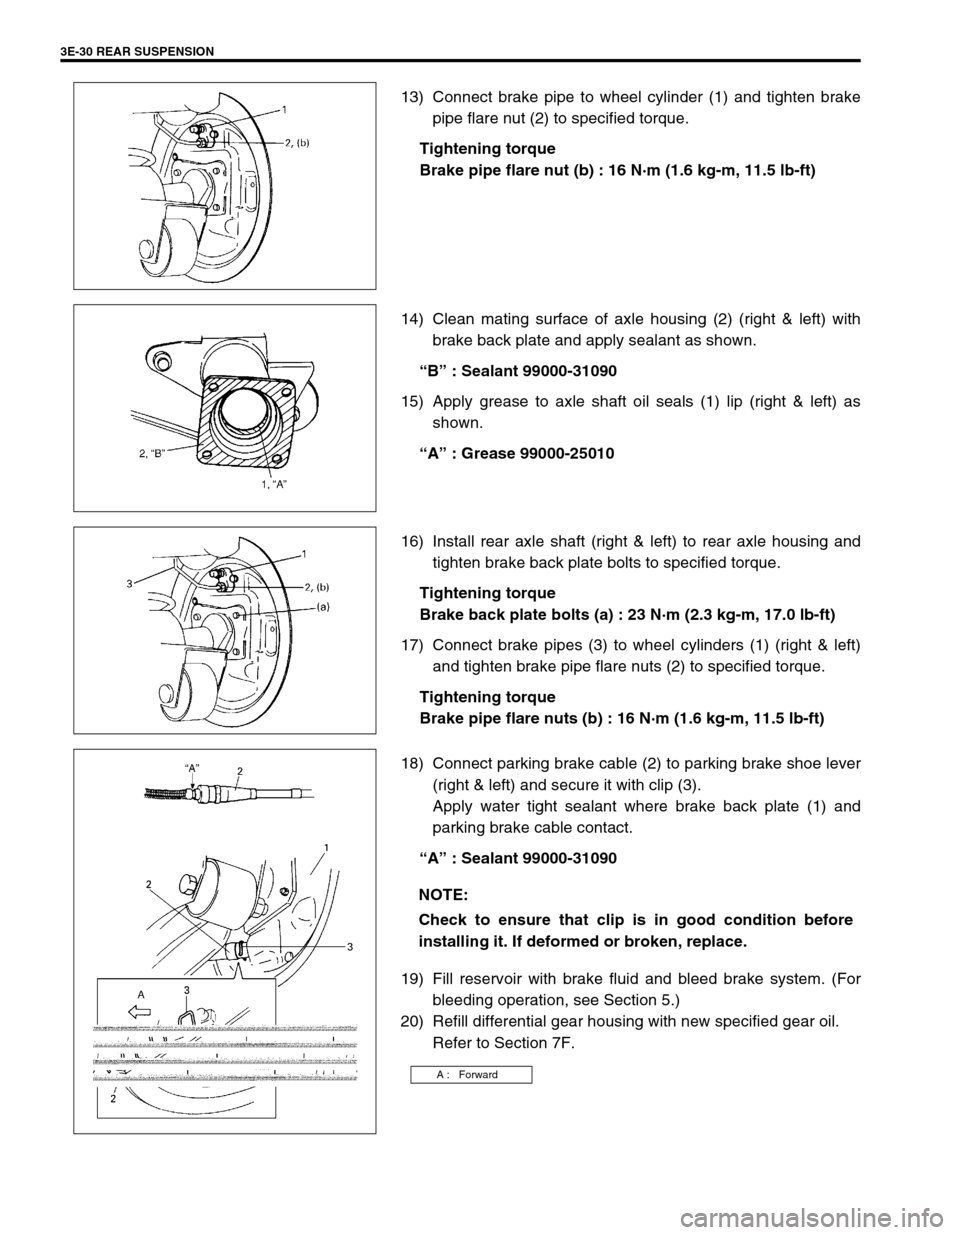 SUZUKI SWIFT 2000 1.G RG413 Service Owners Manual 3E-30 REAR SUSPENSION
13) Connect brake pipe to wheel cylinder (1) and tighten brake
pipe flare nut (2) to specified torque.
Tightening torque
Brake pipe flare nut (b) : 16 N·m (1.6 kg-m, 11.5 lb-ft)